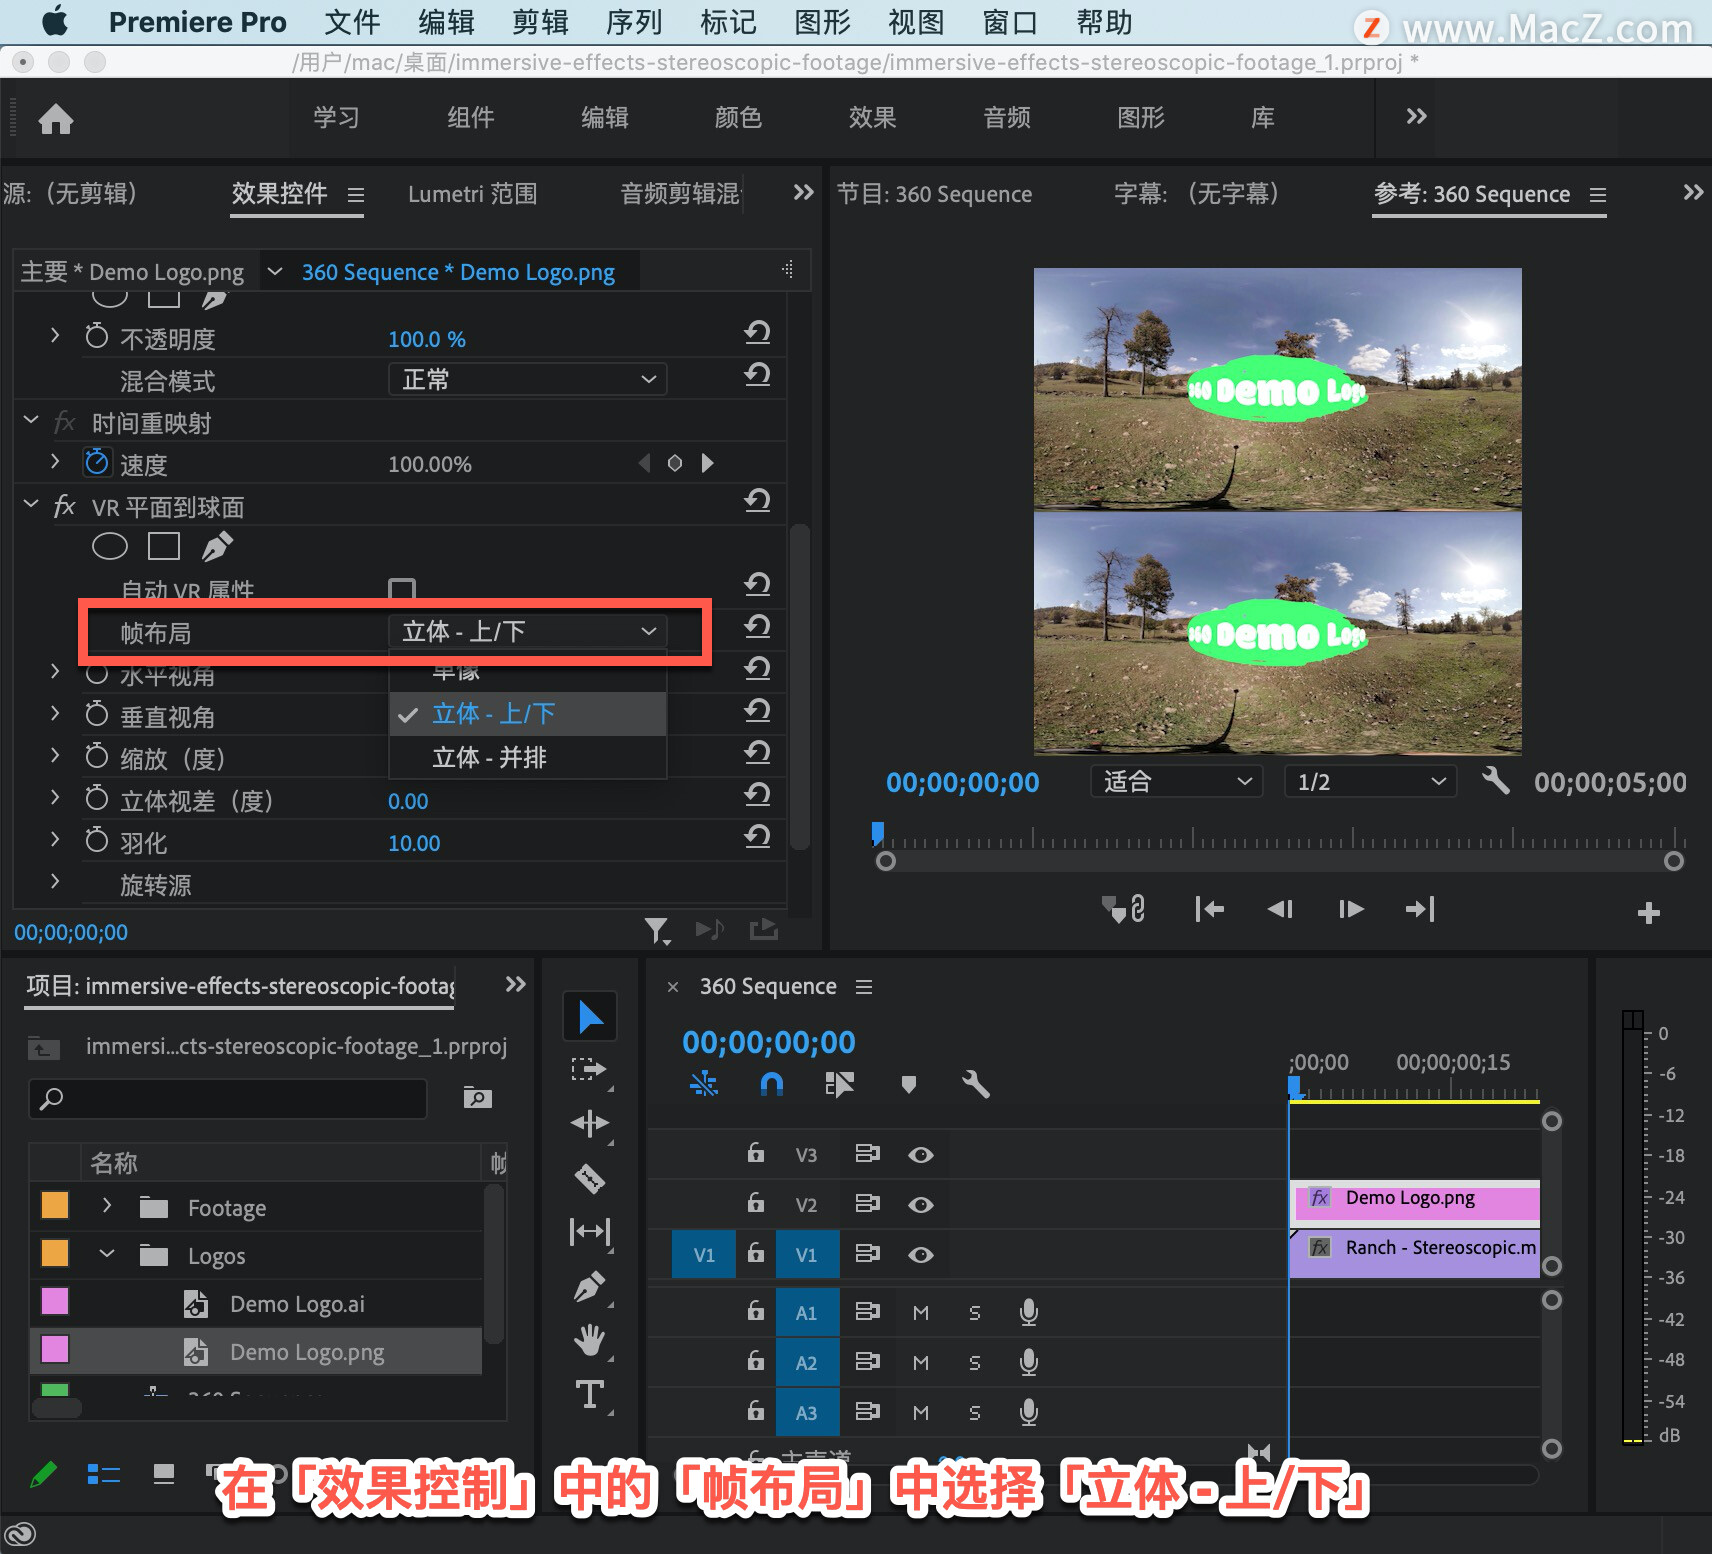 After Effects 教程「78」，如何在 After Effects 中对立体视频应用沉浸式视频效果？